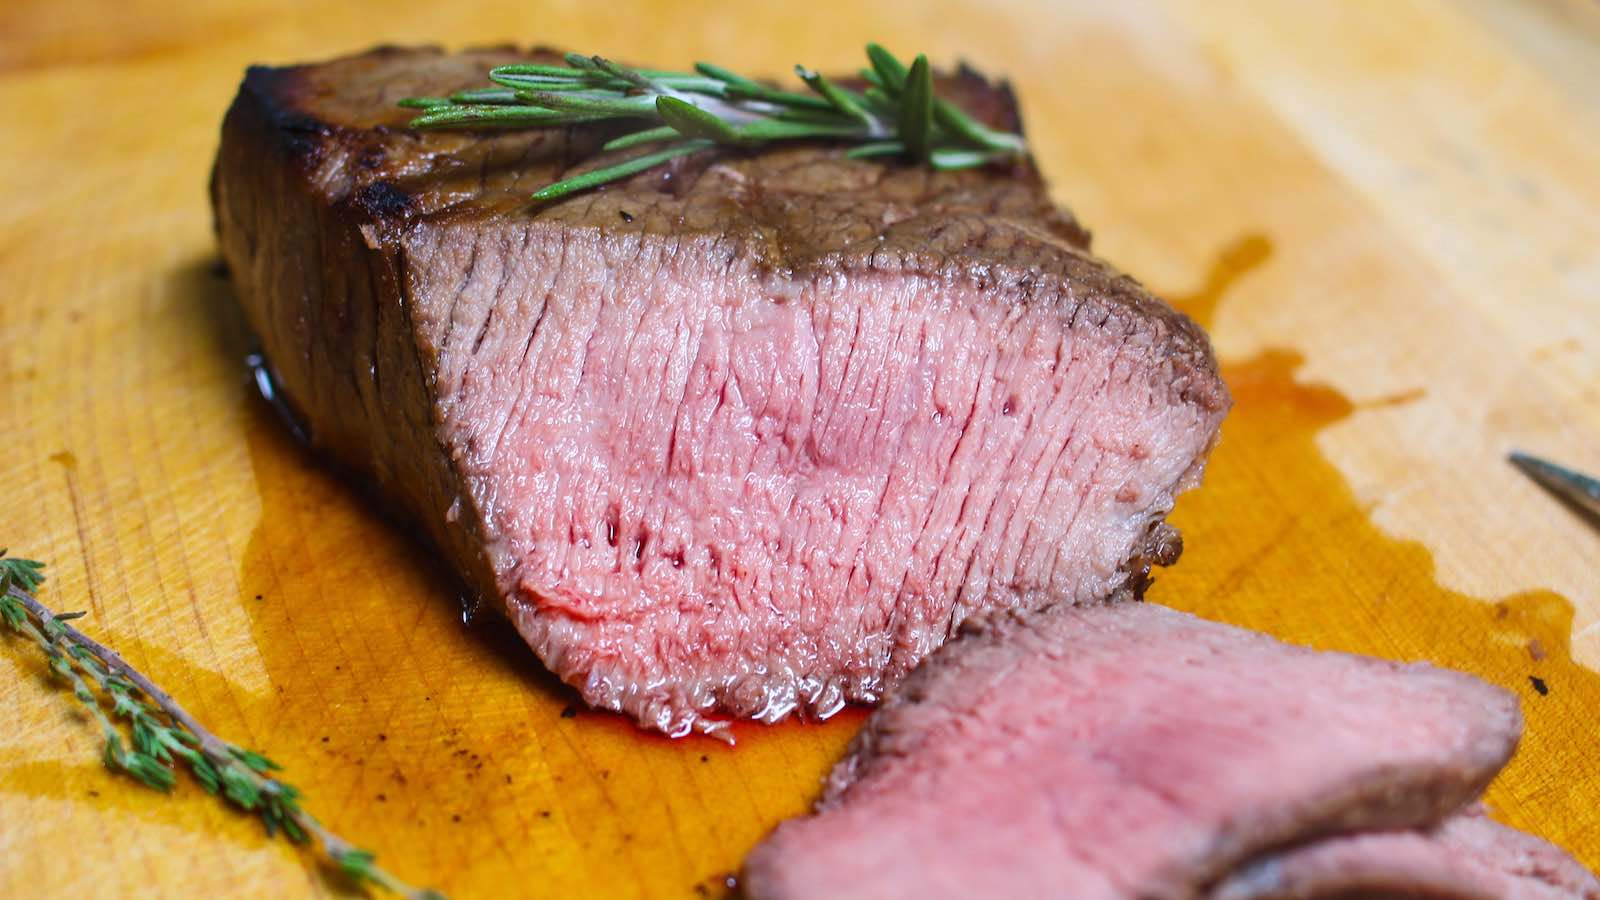 Cross-sectional view of London Broil cooked medium showing the pale pink color and juicy meat